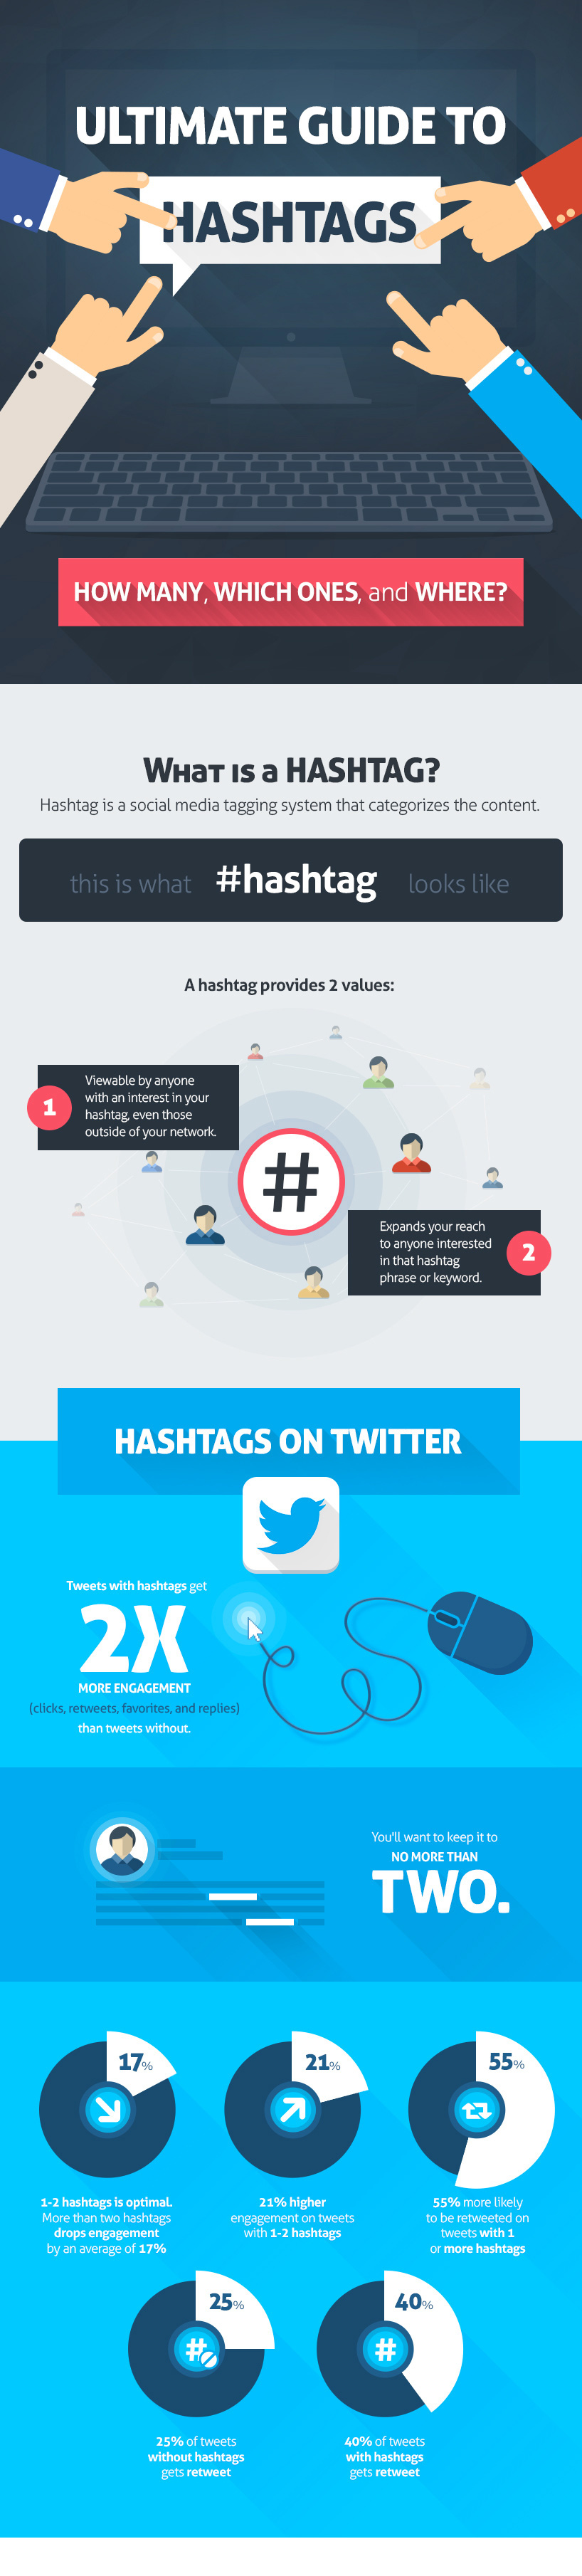 lwolf ultimate guide to hashtags 1